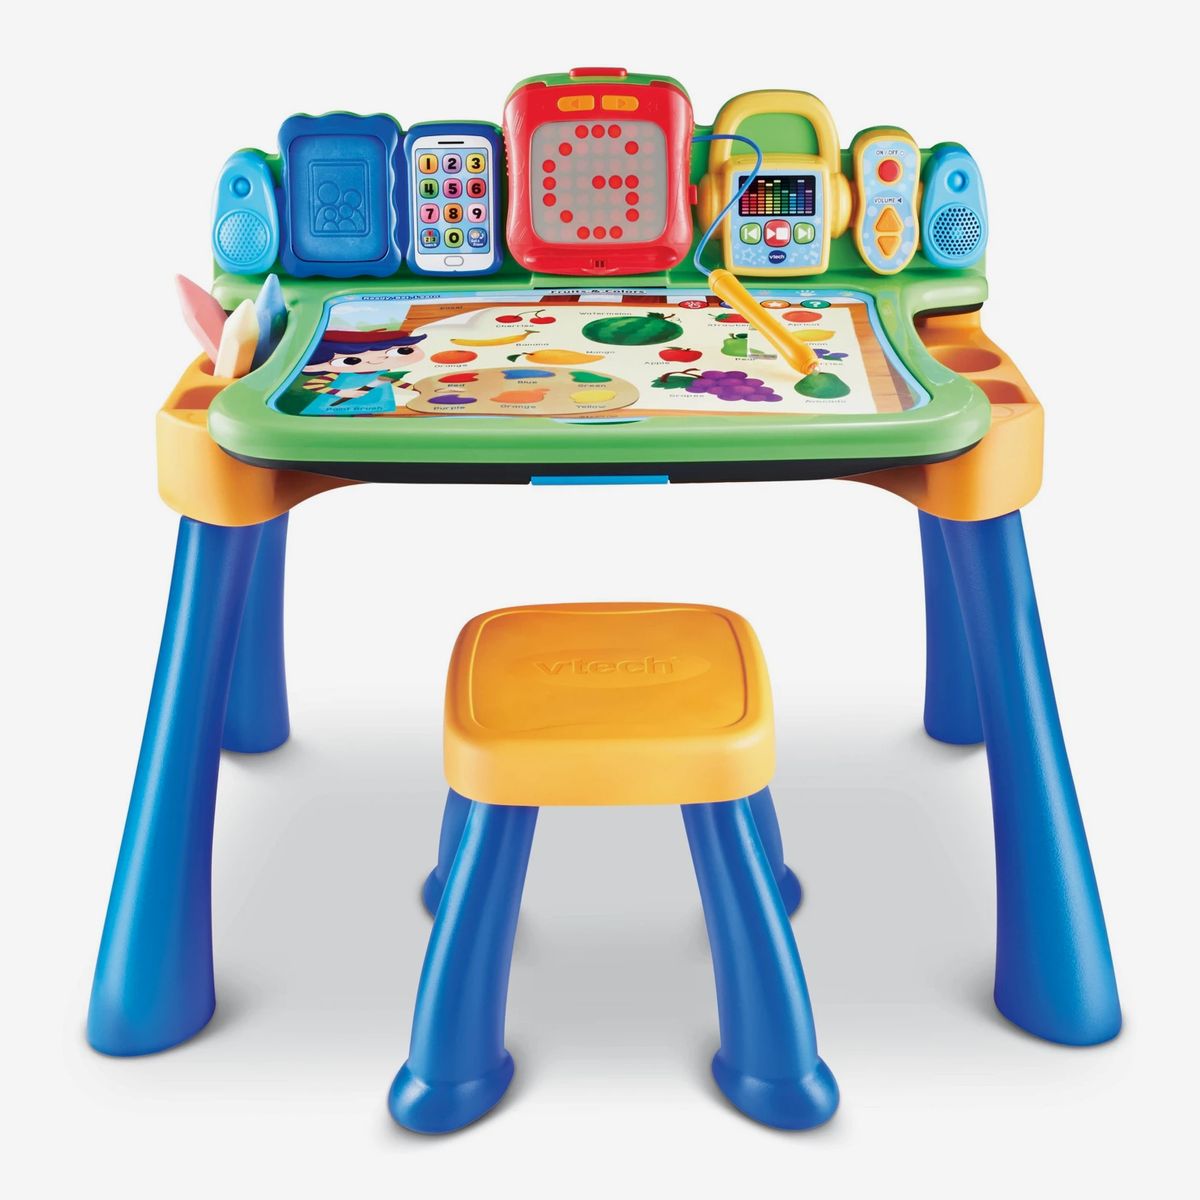 Educational Toys For 2 To 3 Year Olds Outlet Store Save 48 Jlcatj 